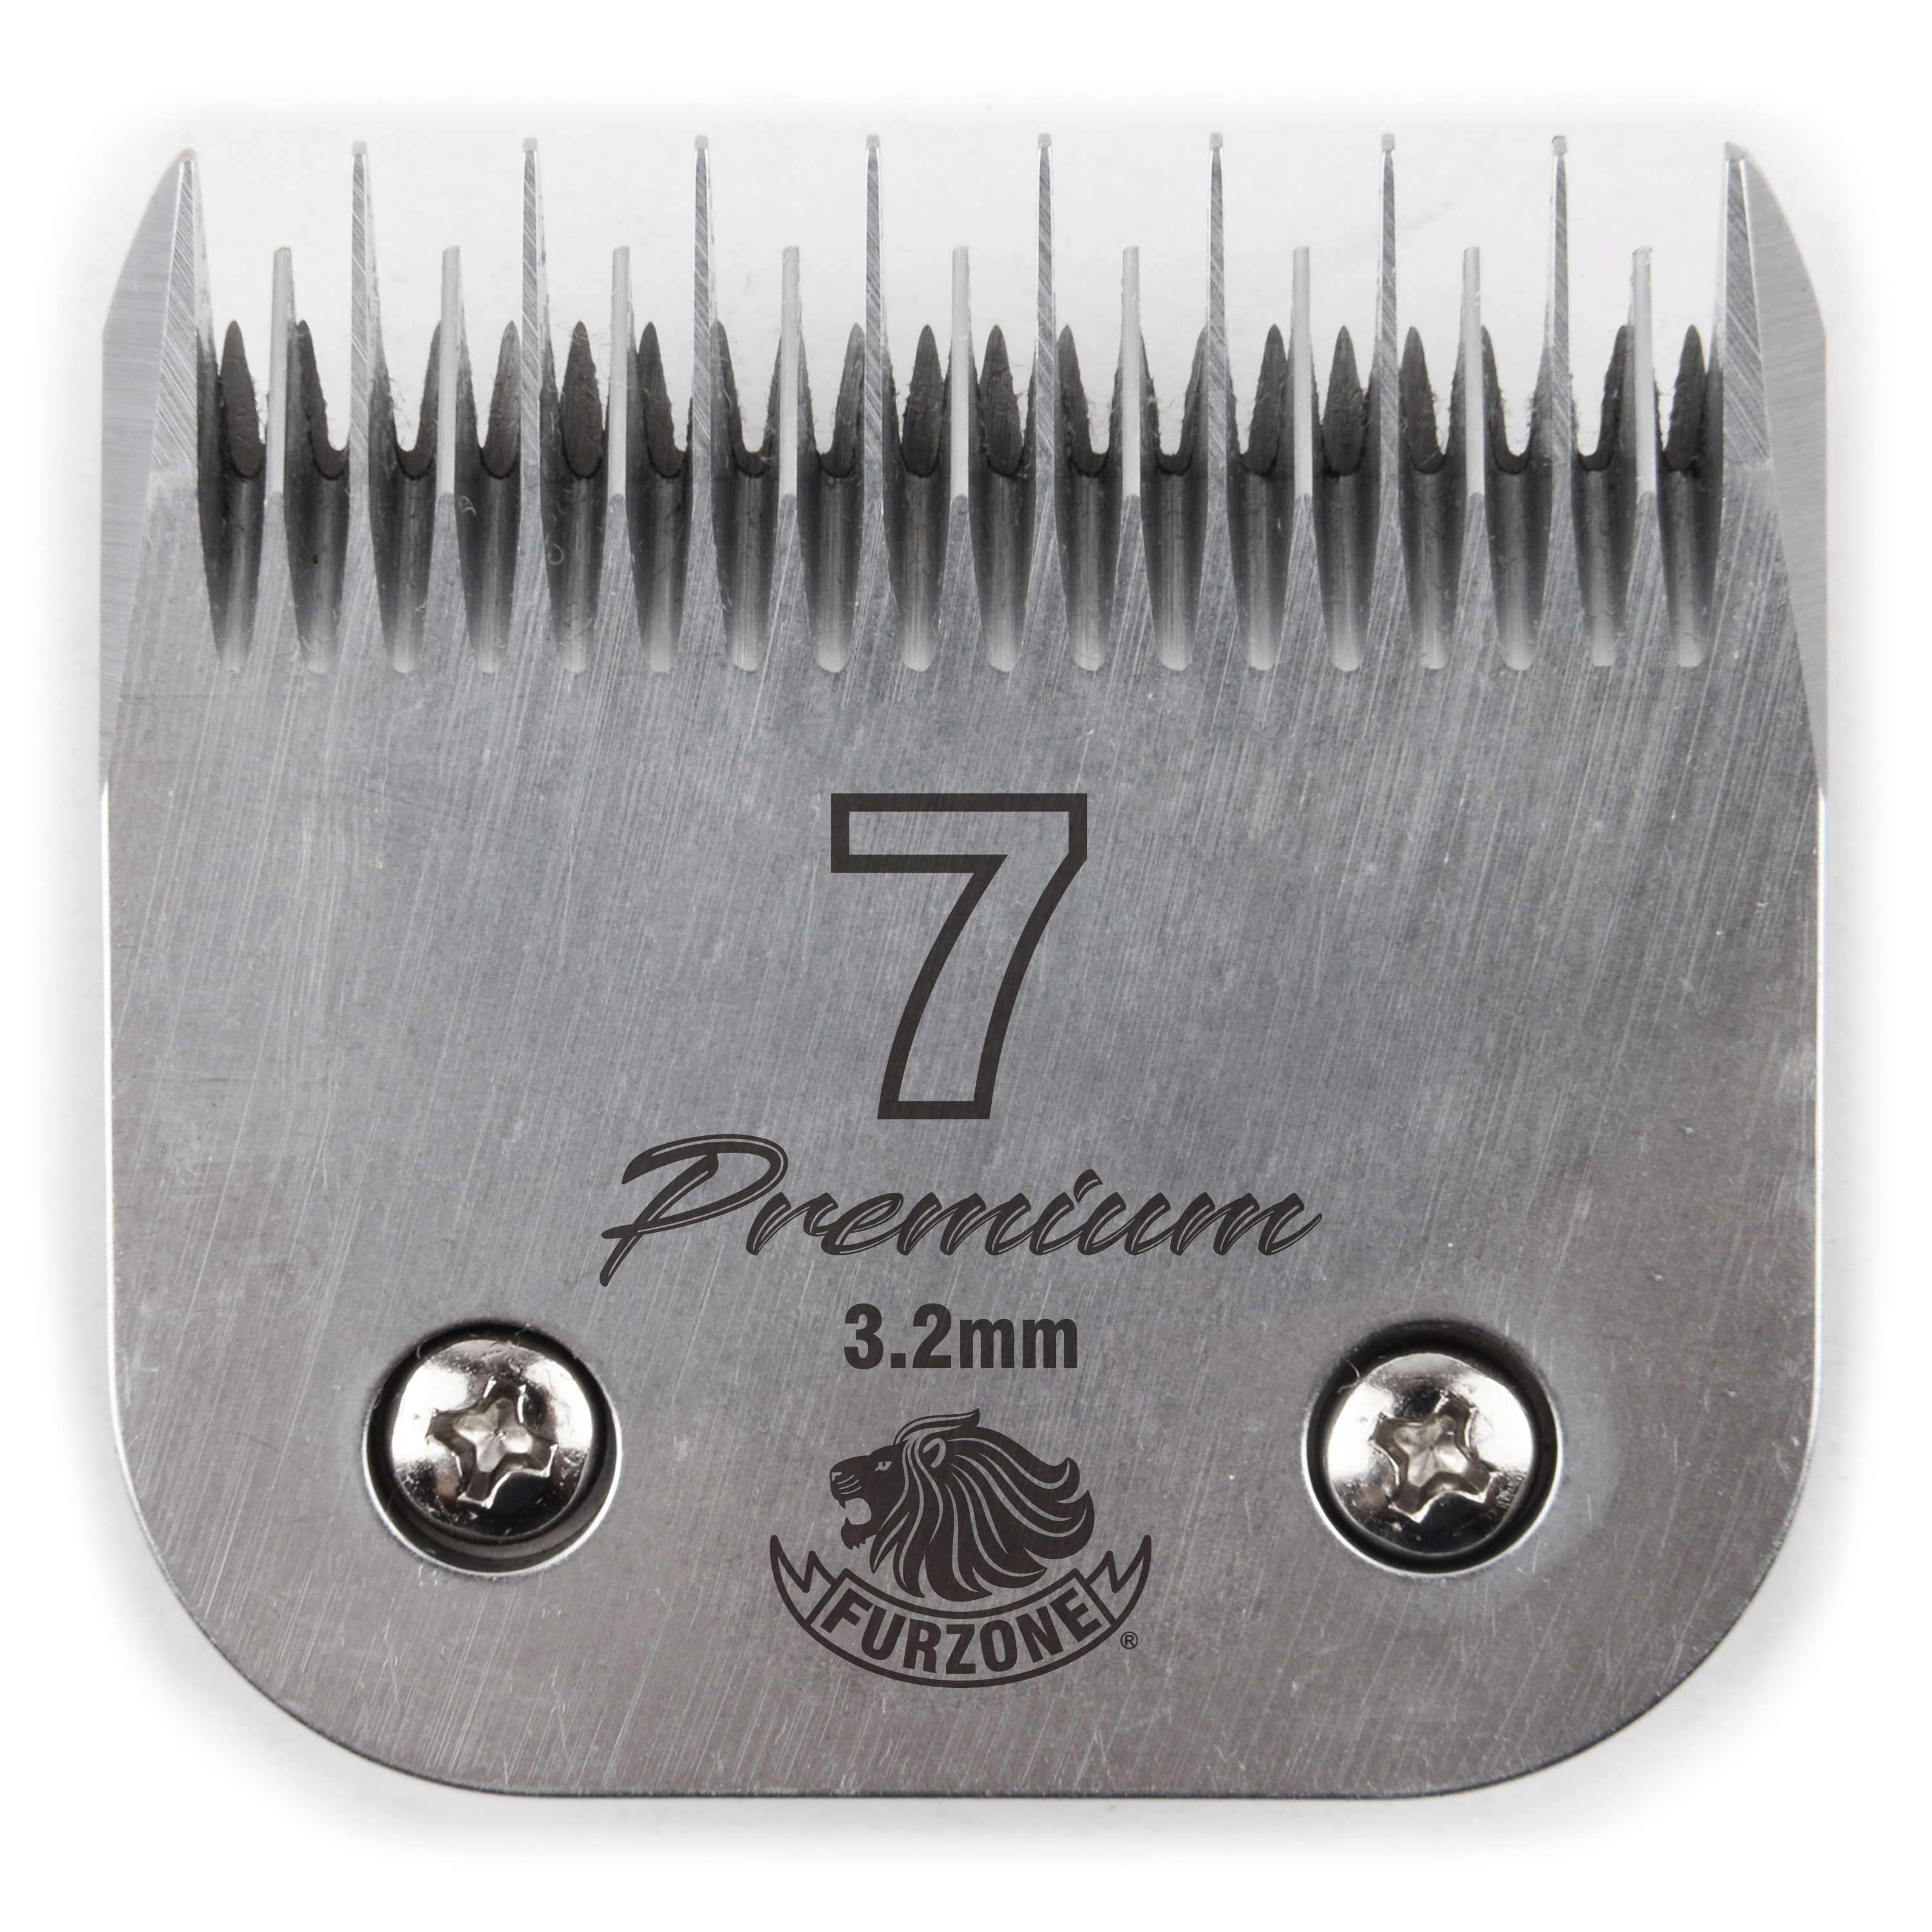 Furzone #7-3.2mm-Skip Teeth Professional A5 Detachable Blade - Made Of Extra Durable Japanese Steel